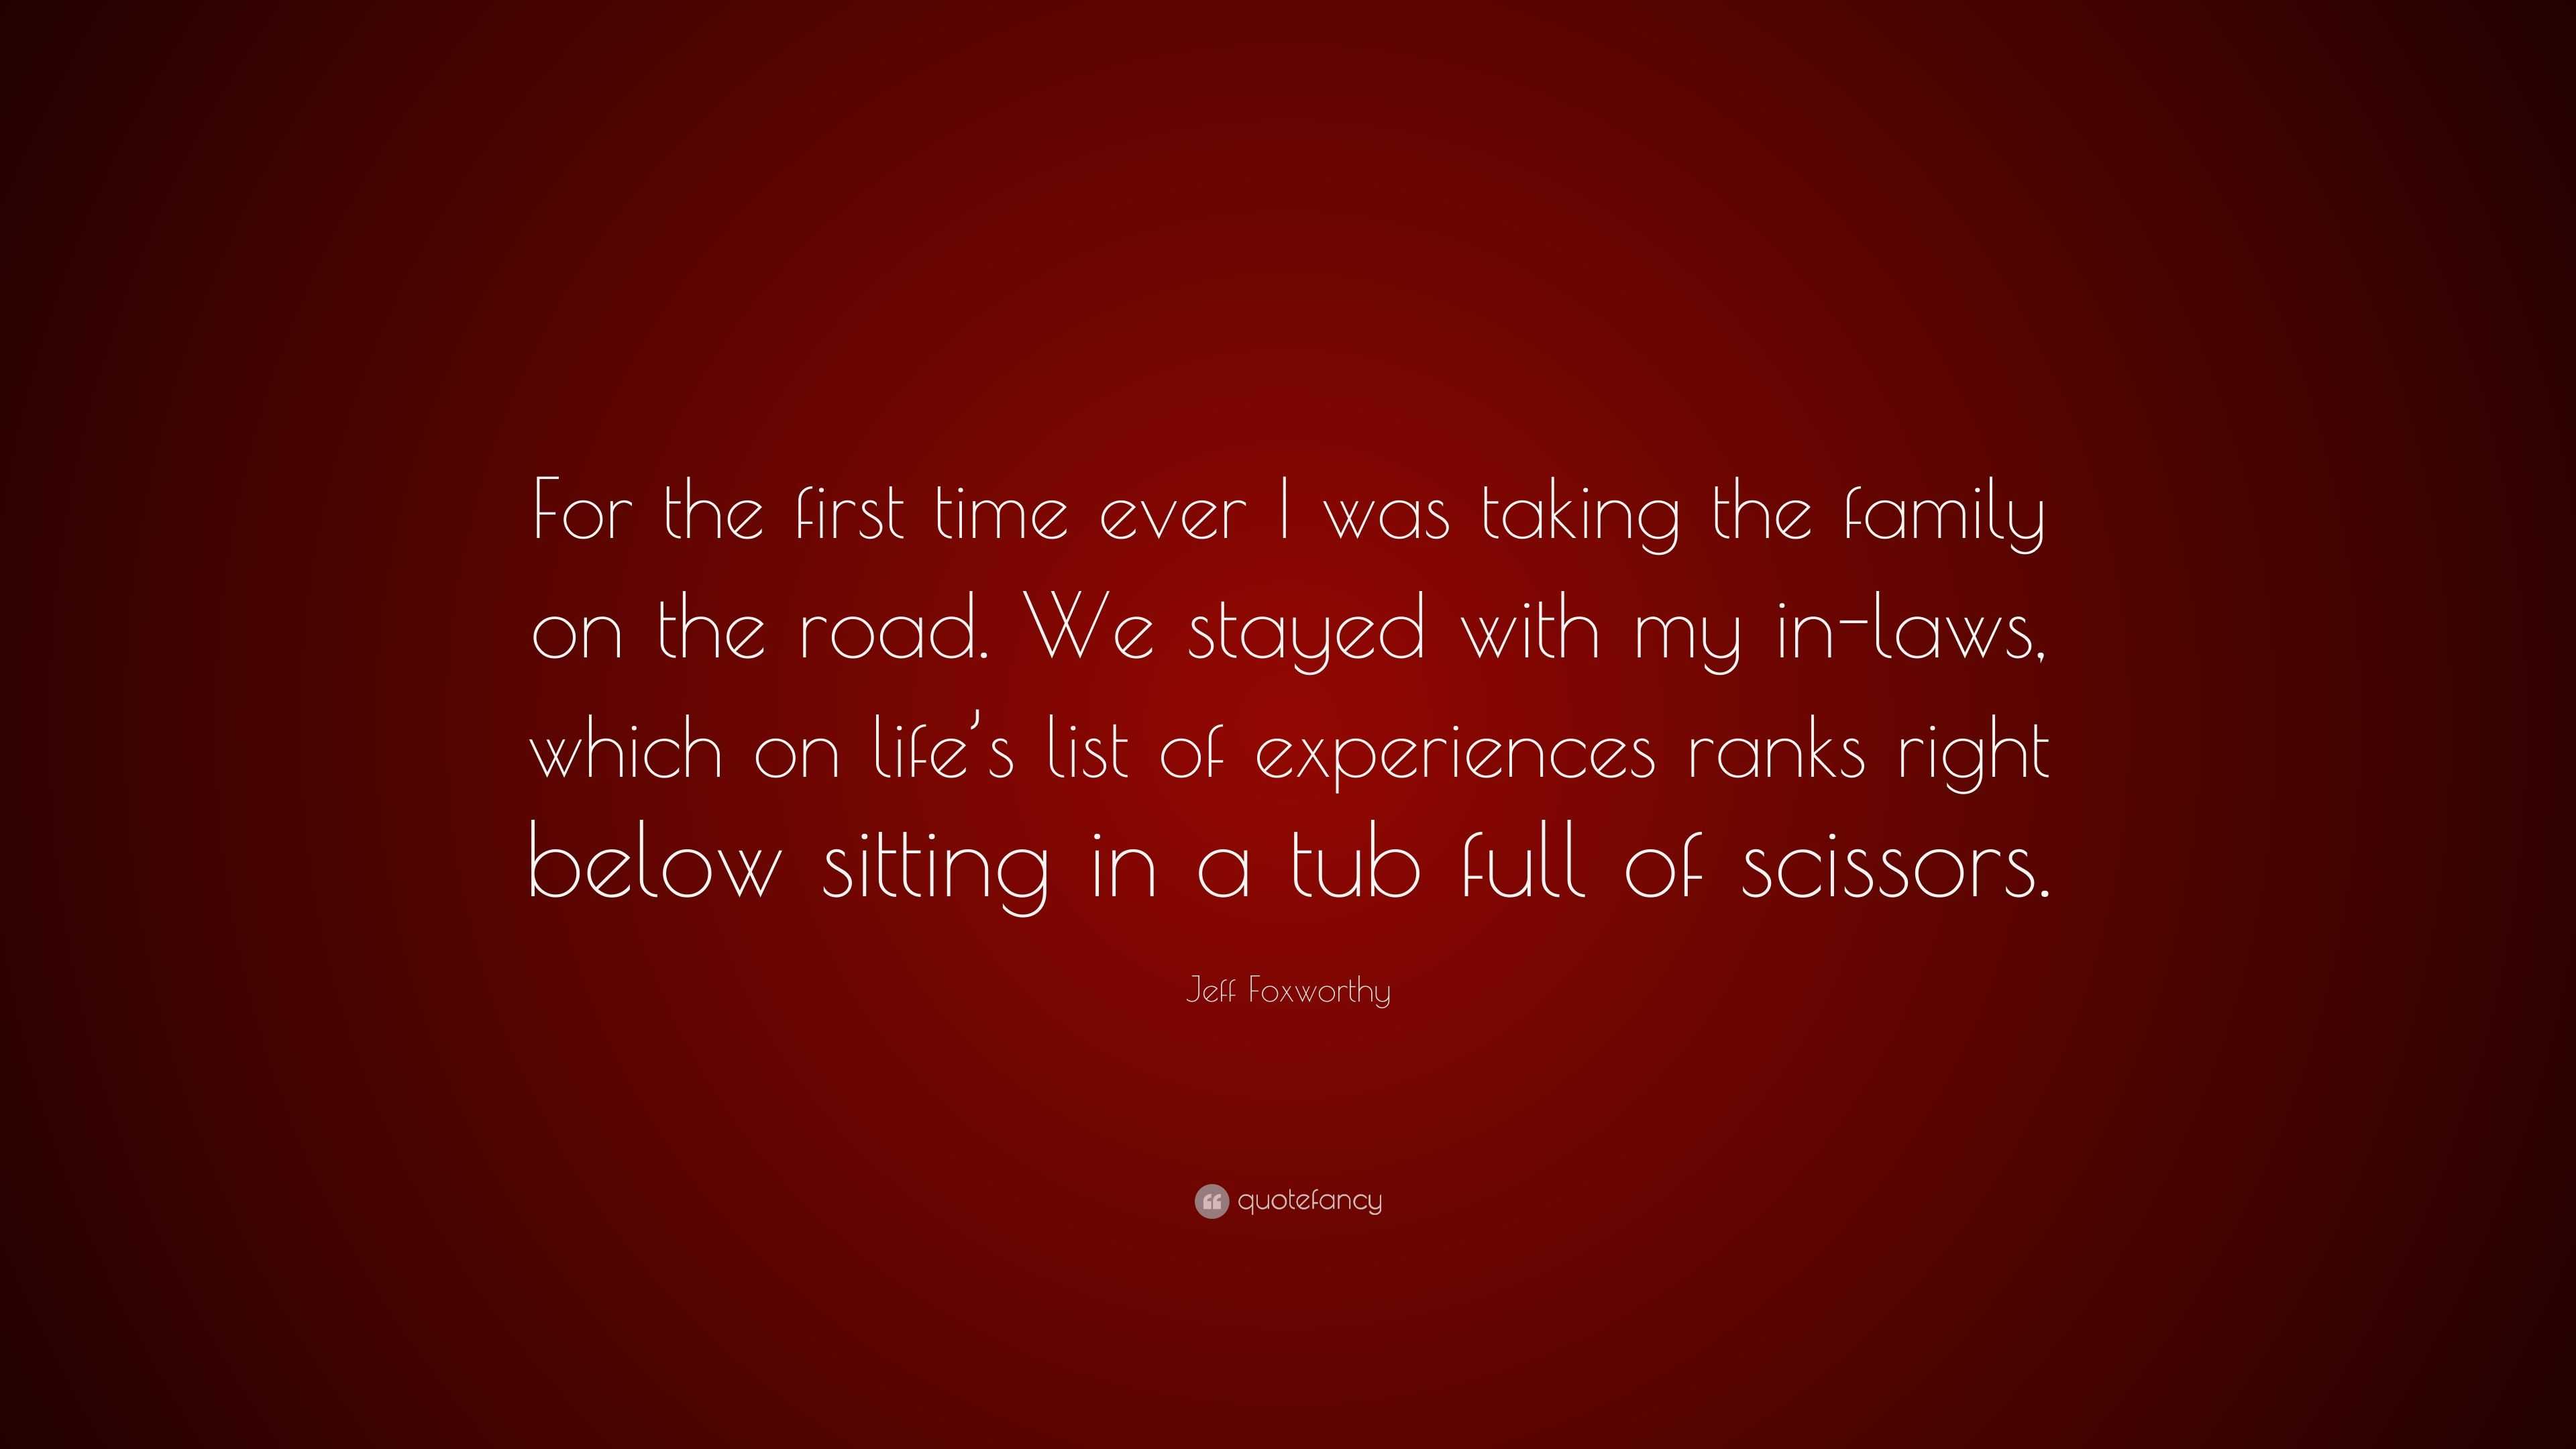 Jeff Foxworthy Quote: “For the first time ever I was taking the family ...